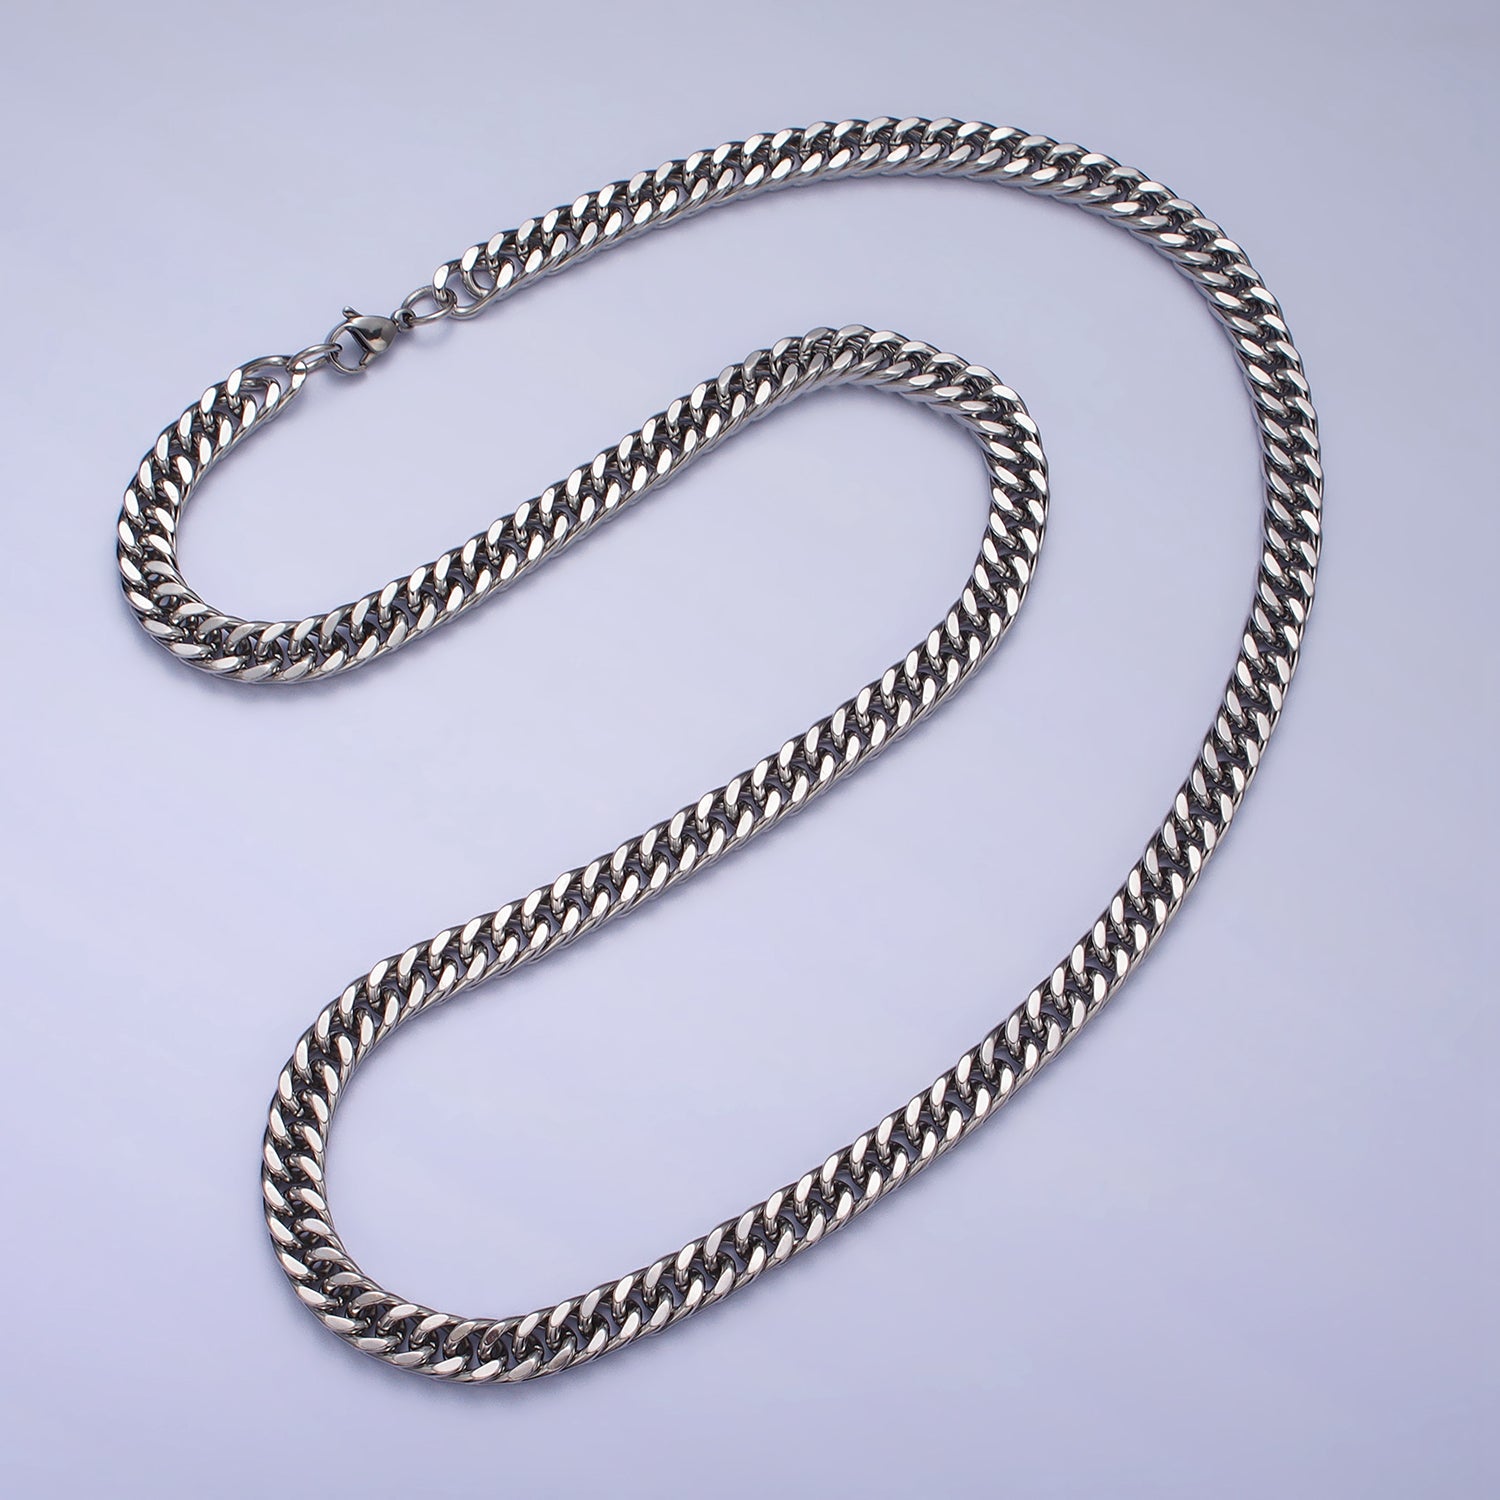 Men's Chain Necklace, Cuban Link Chain Necklace, Stainless Steel Silver Chain, 7mm Cuban Chain Necklace 23.5 inch WA-1591 WA-1592 - DLUXCA